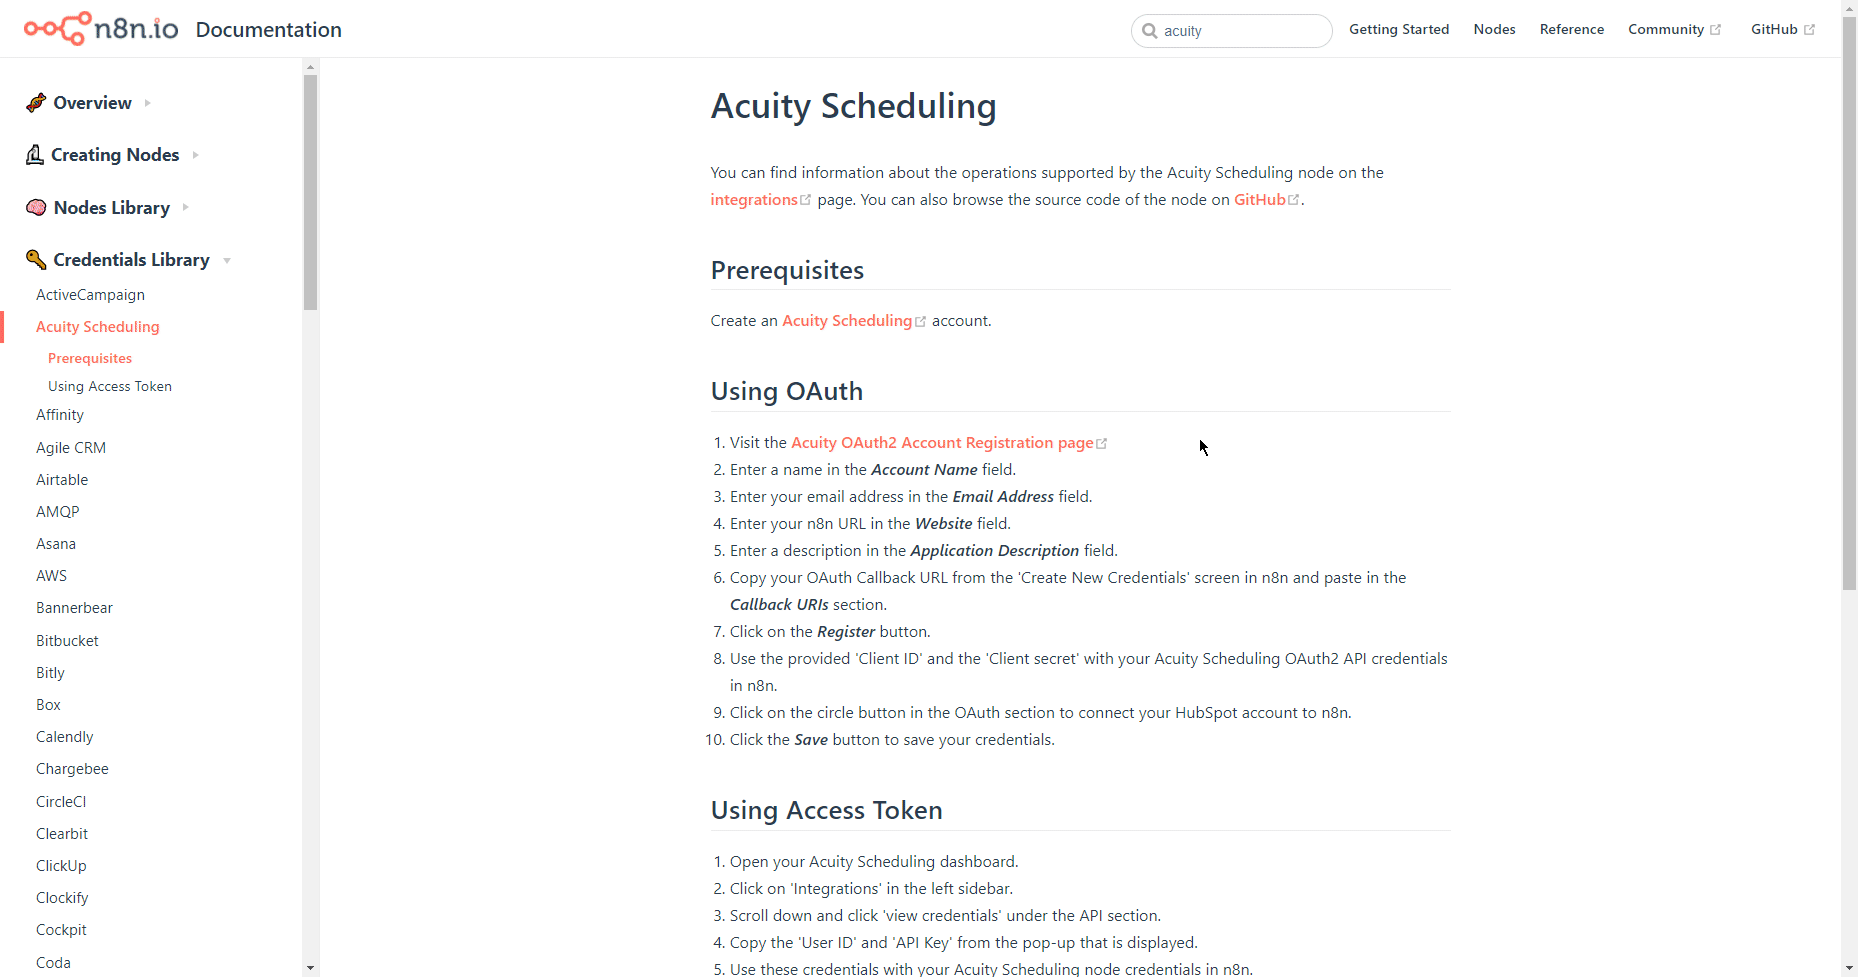 Getting Acuity Scheduling OAuth2 credentials